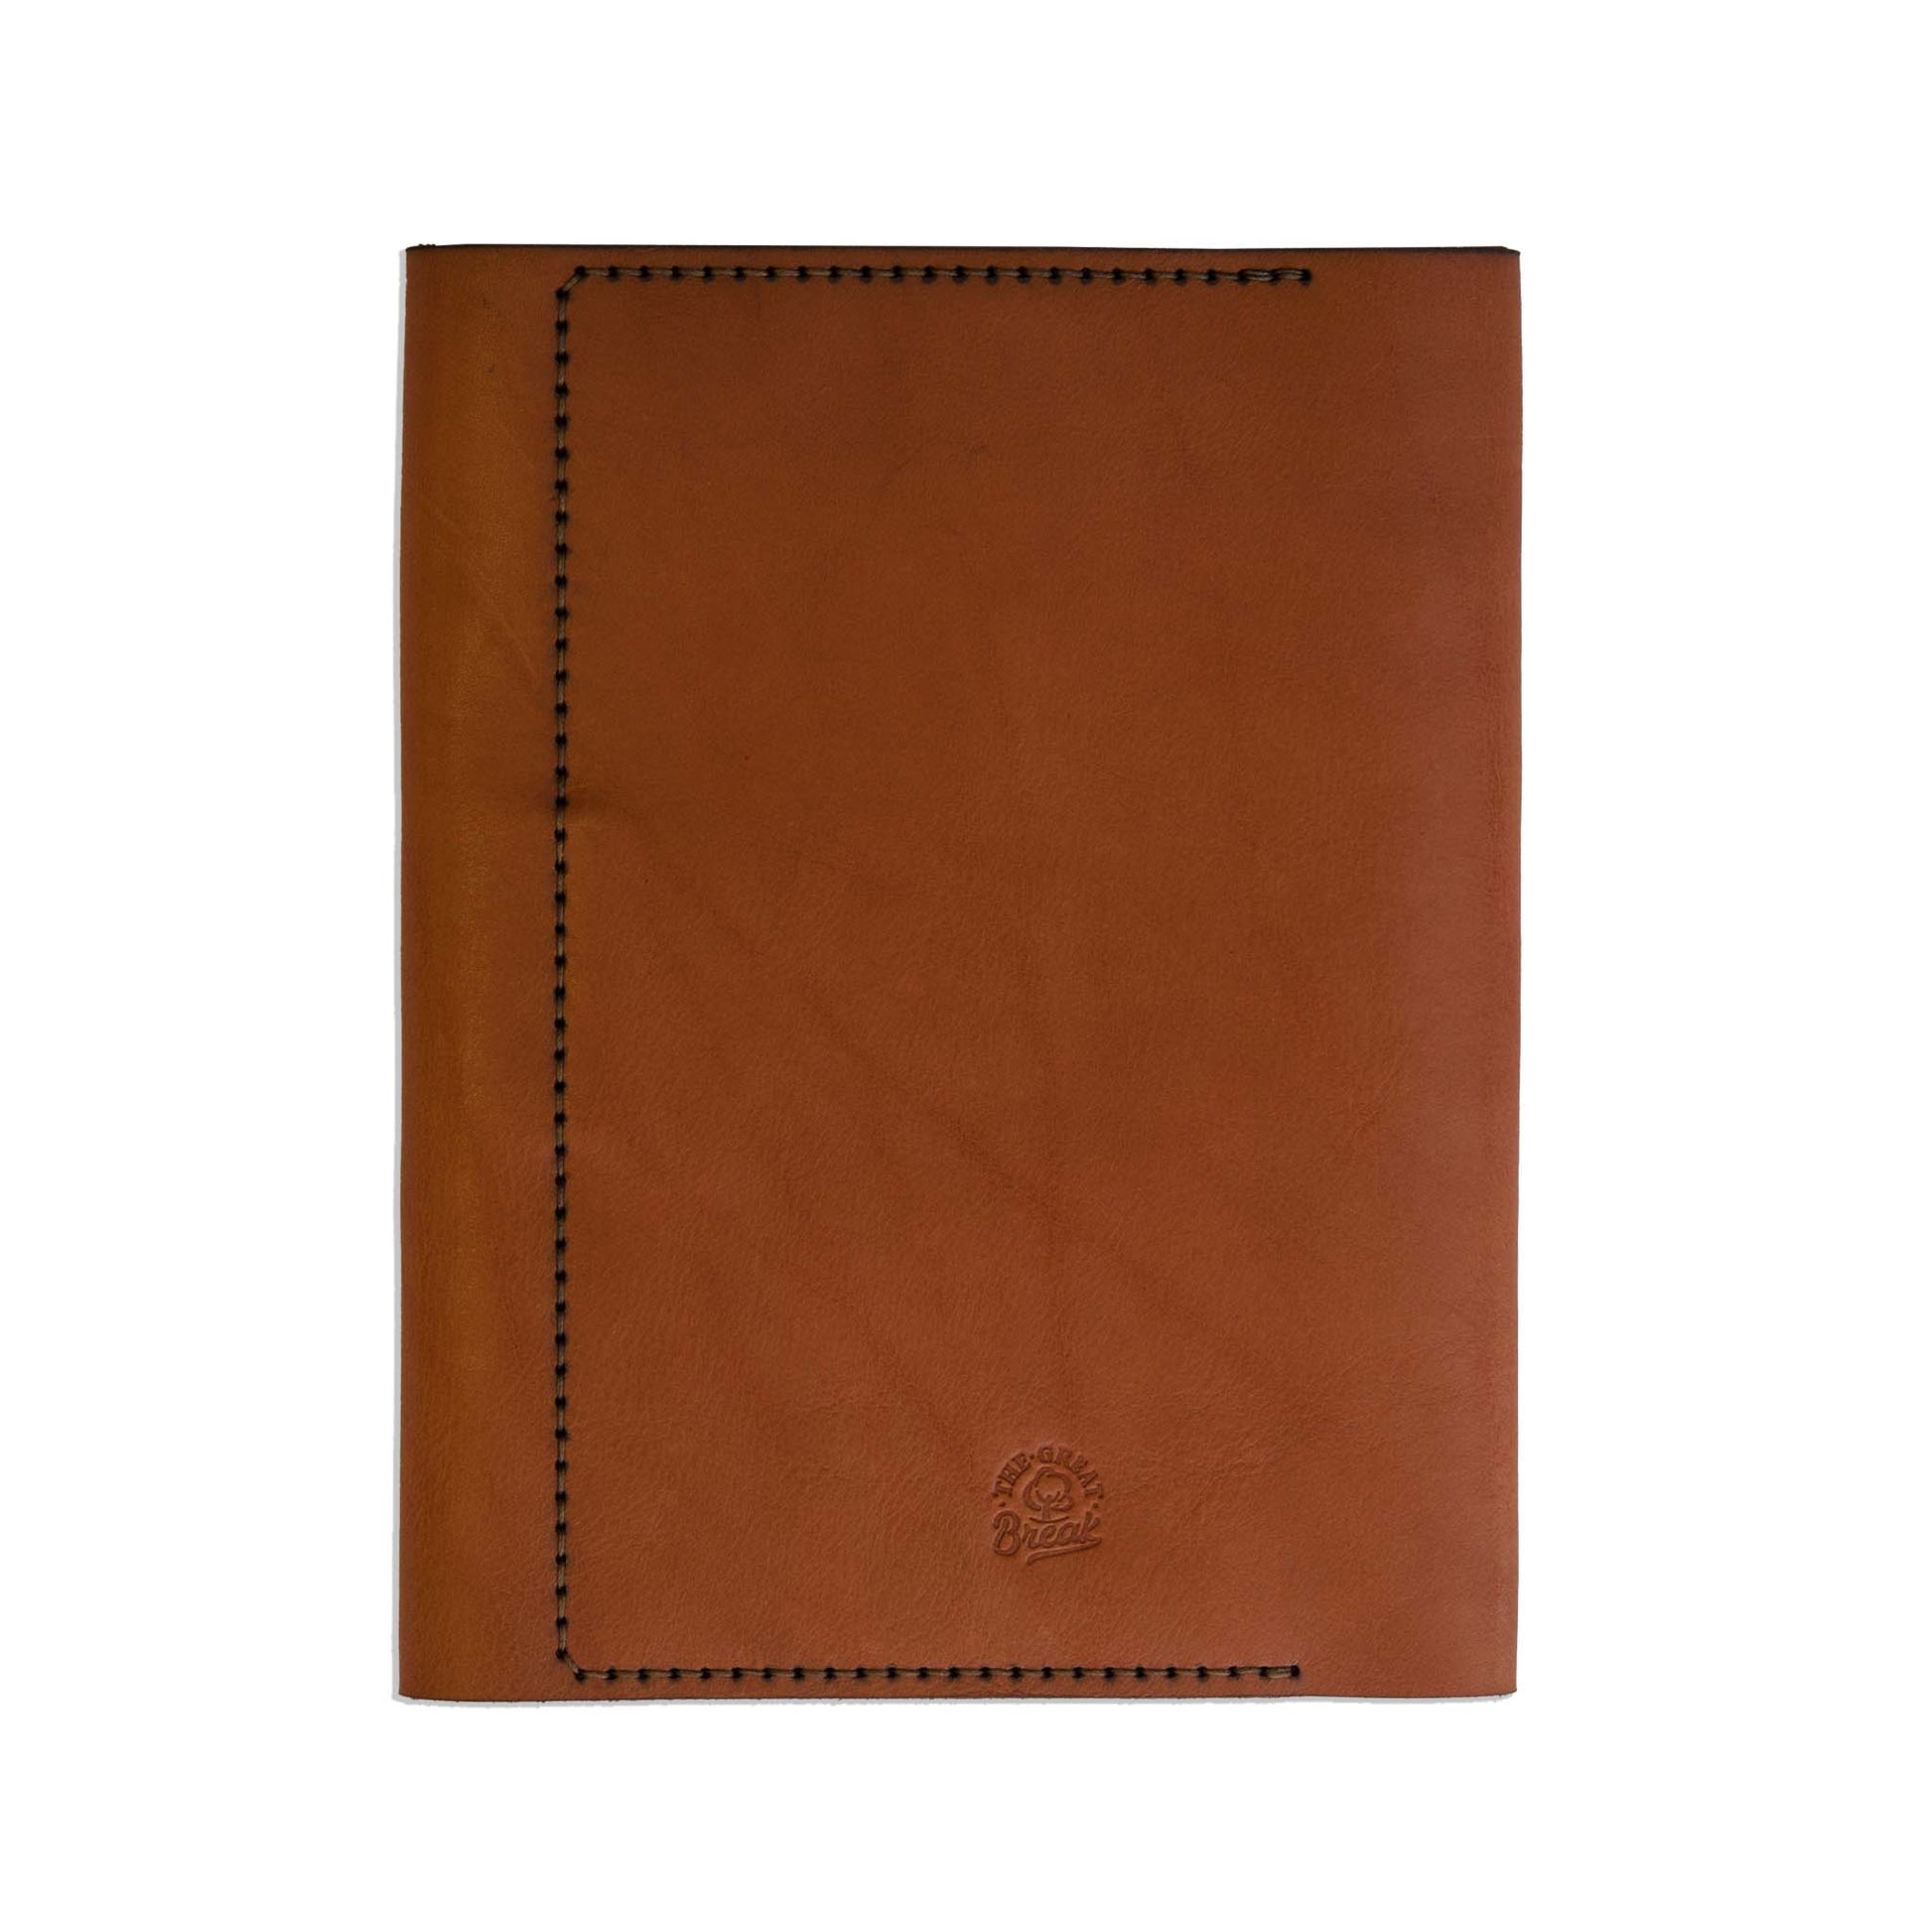 A5 Leather Notebook Cover - Adventure Range - The Great Break